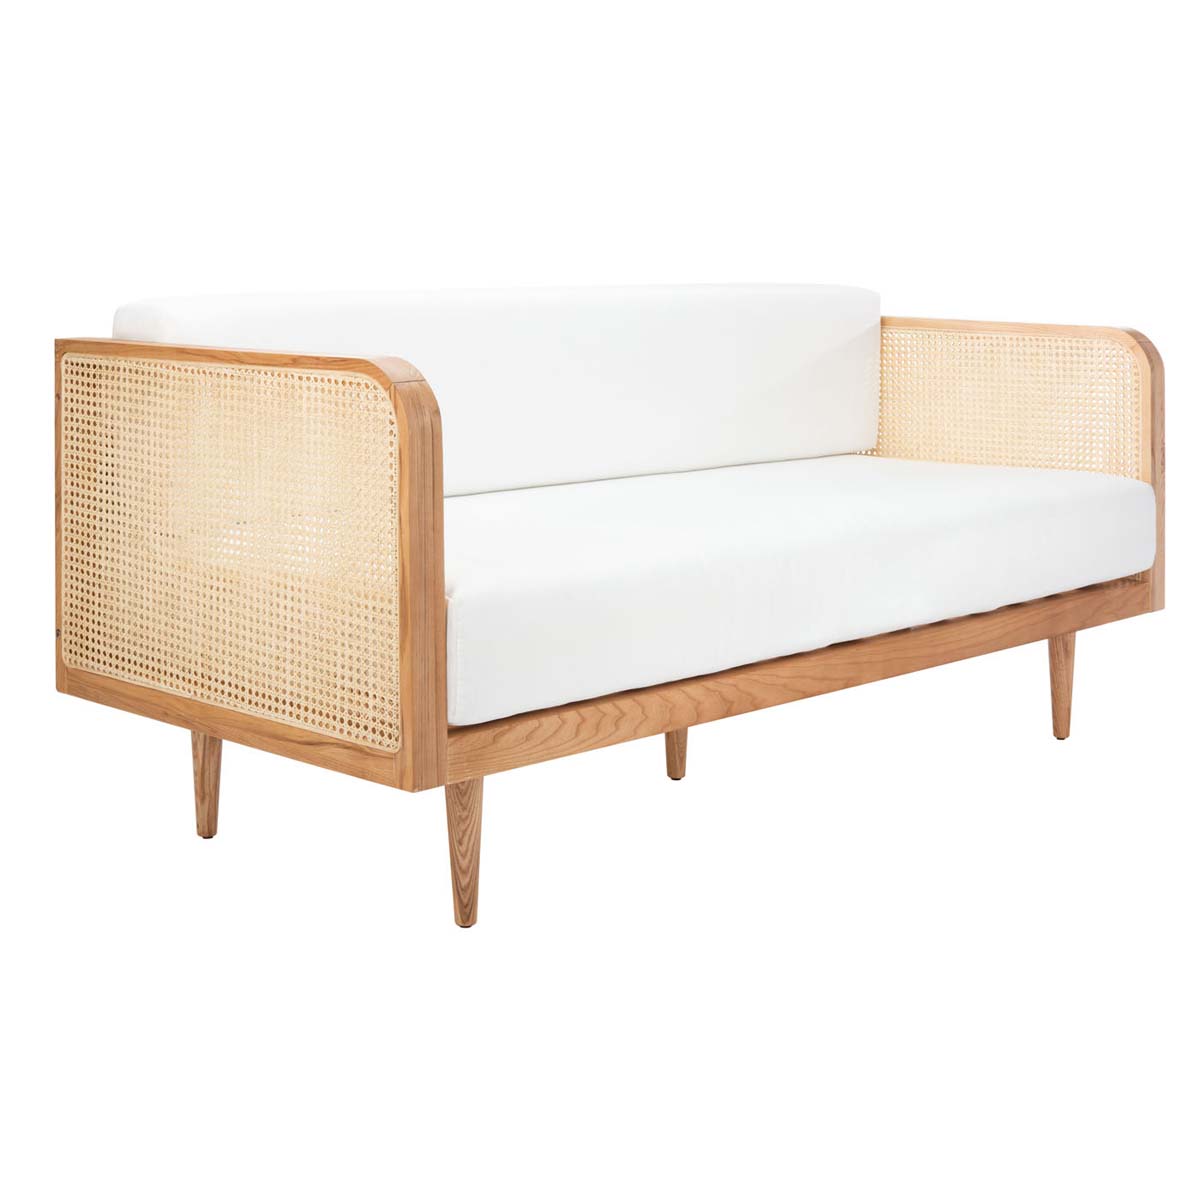 Safavieh Couture Helena French Cane Daybed - Natural / Beige